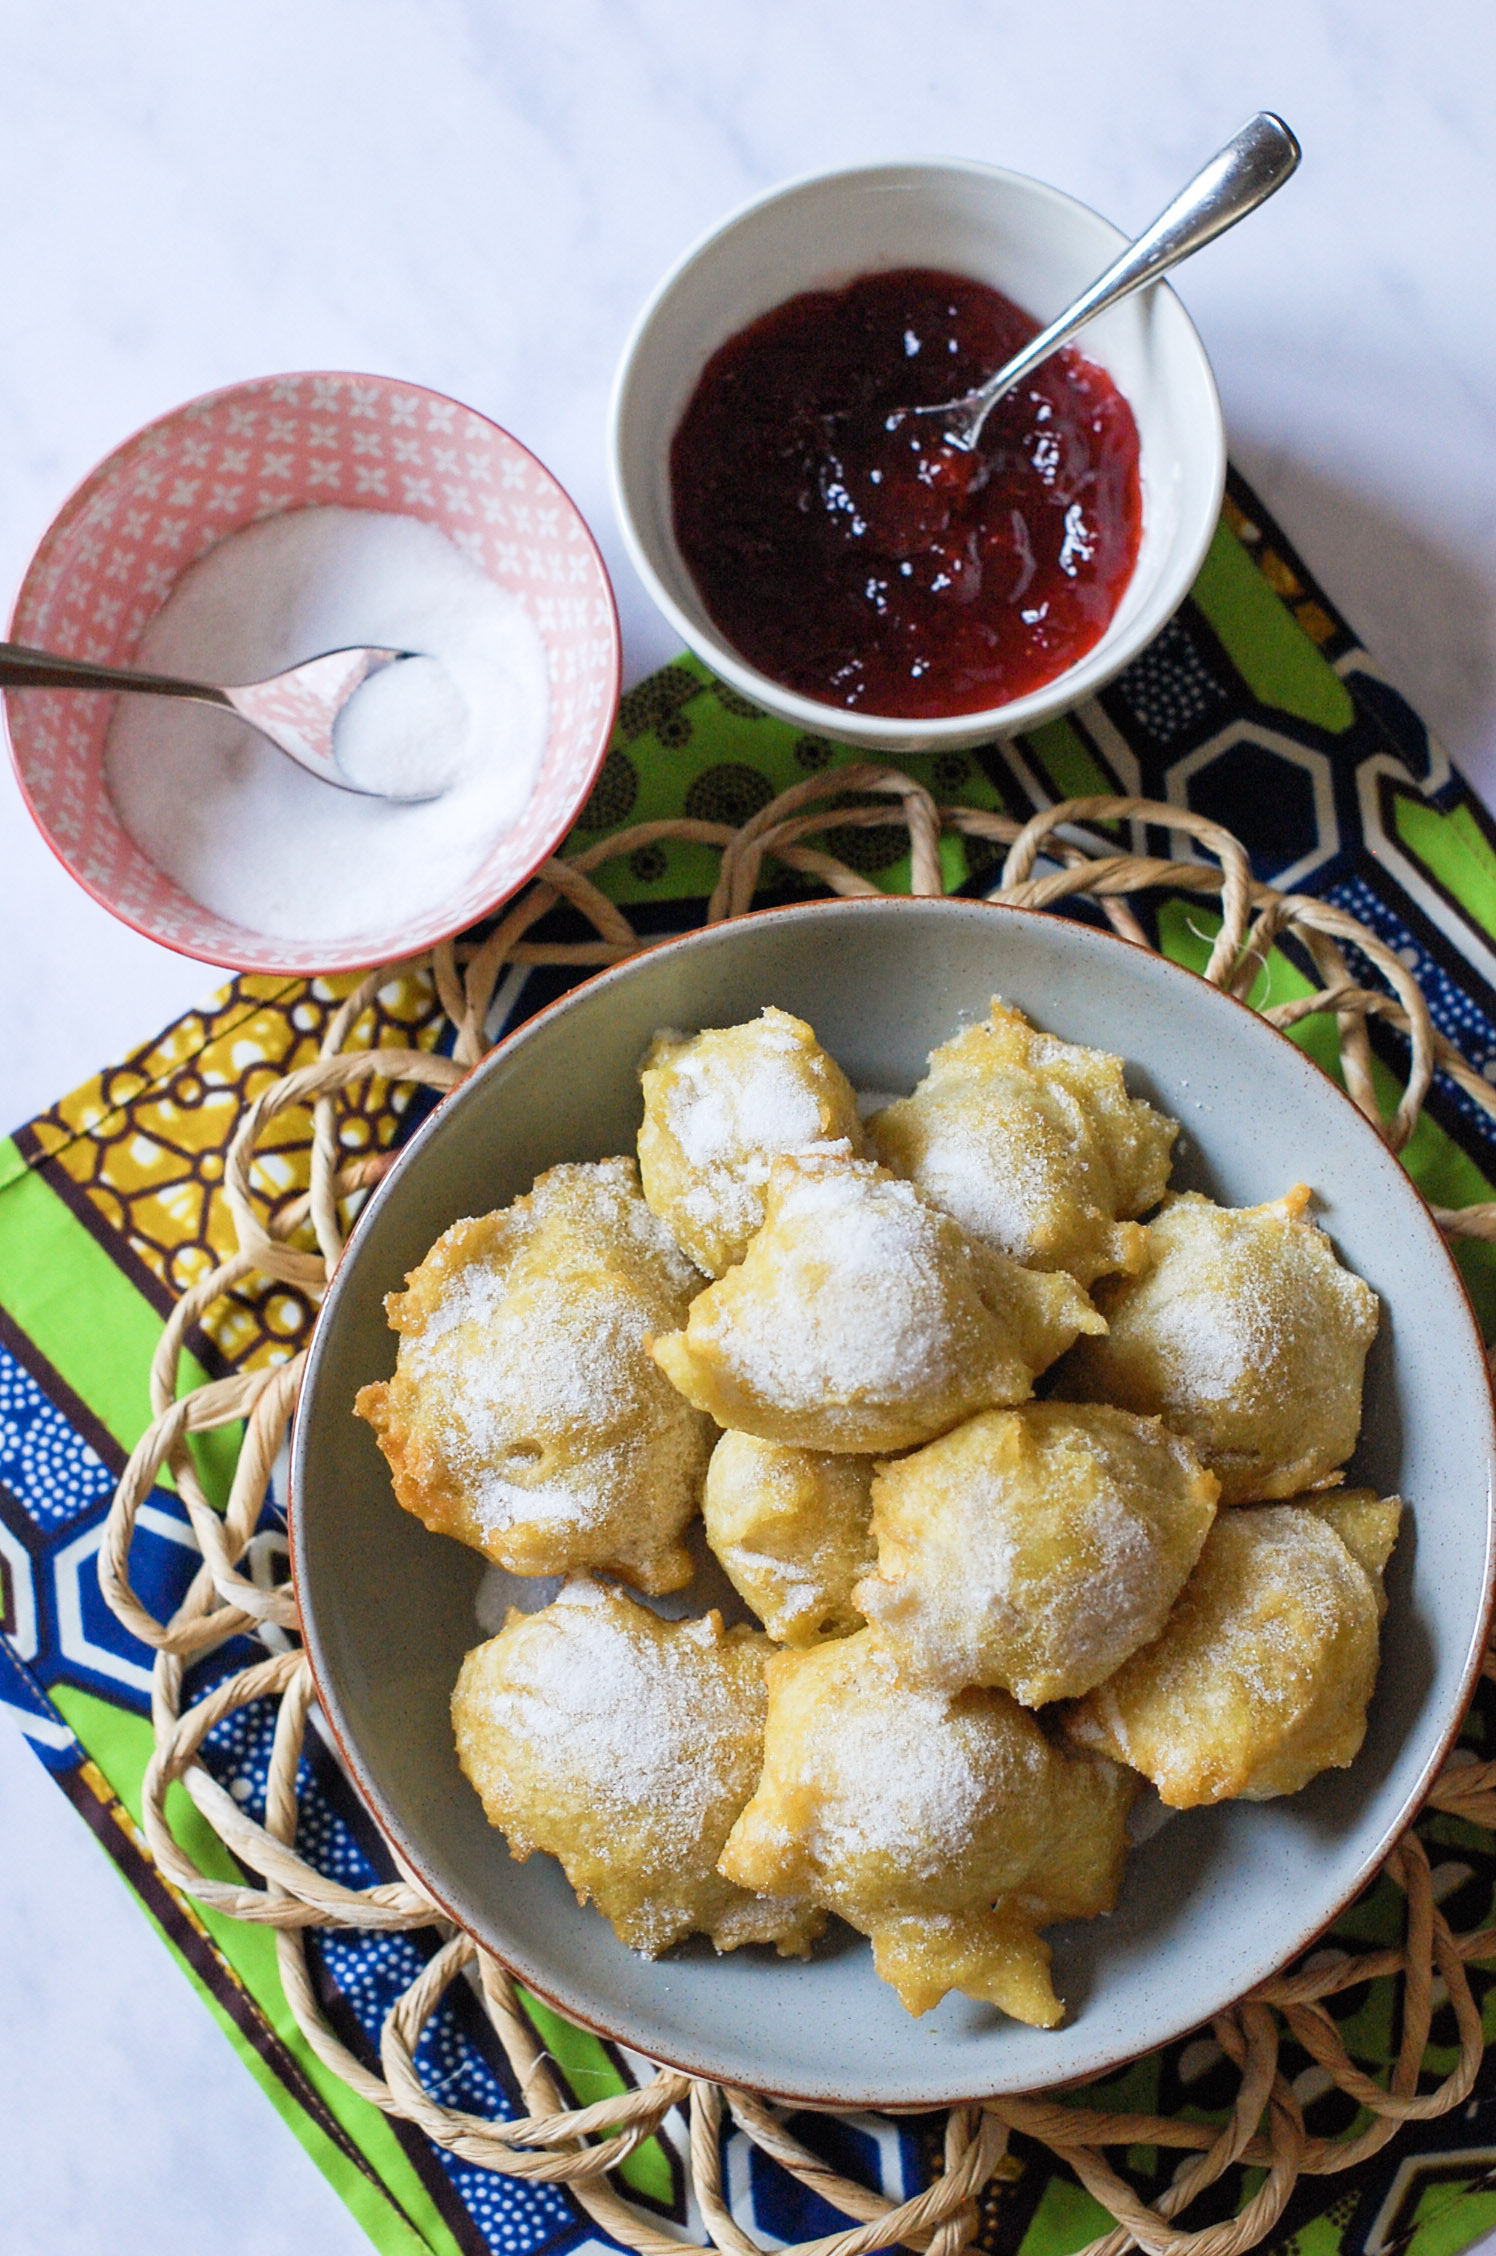 a bowl of mini doughnuts with jam and sugar